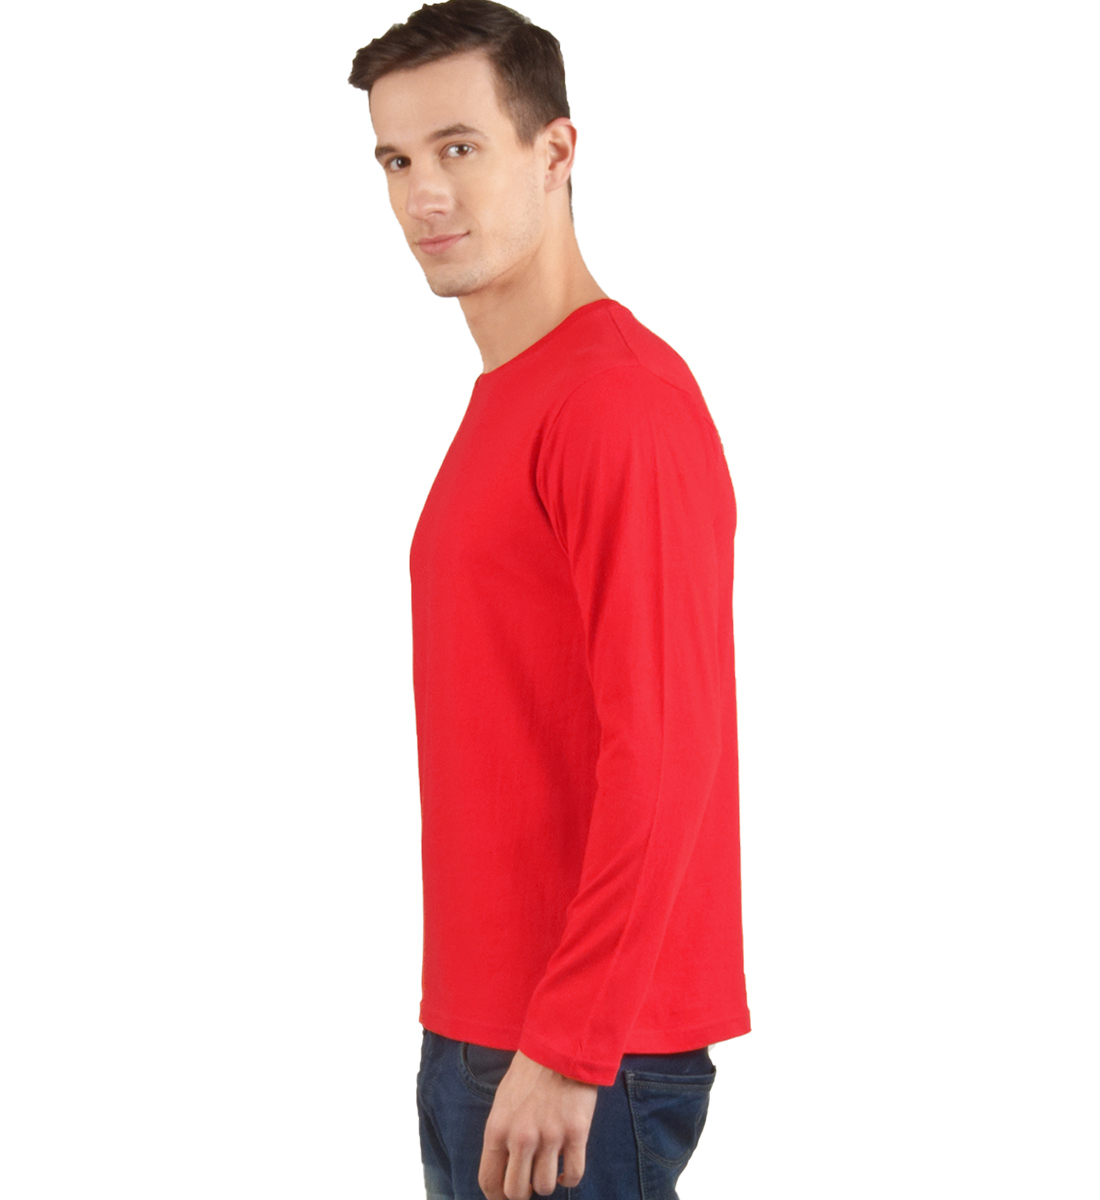 Buy Red Plain T-Shirt Full Sleeves Round Neck Cotton T-Shirt Online @ â¹399 from ShopClues